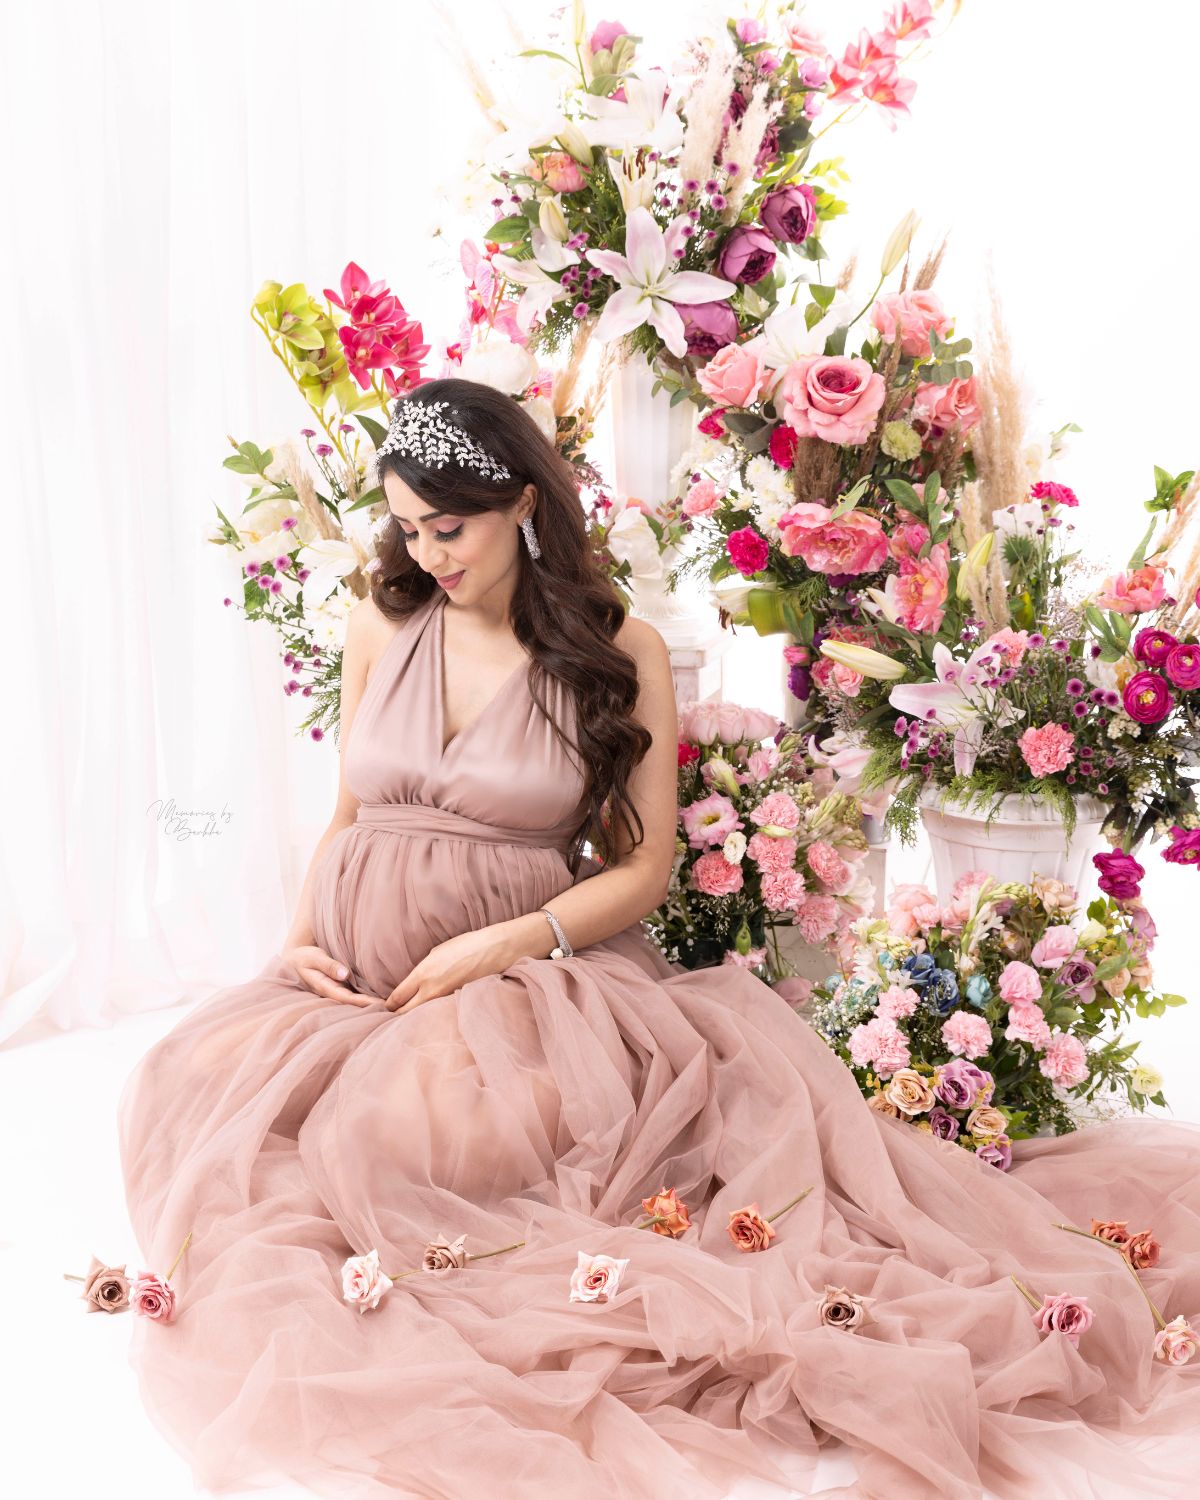 Blossoming Beauty Embracing Nature in Maternity Photography